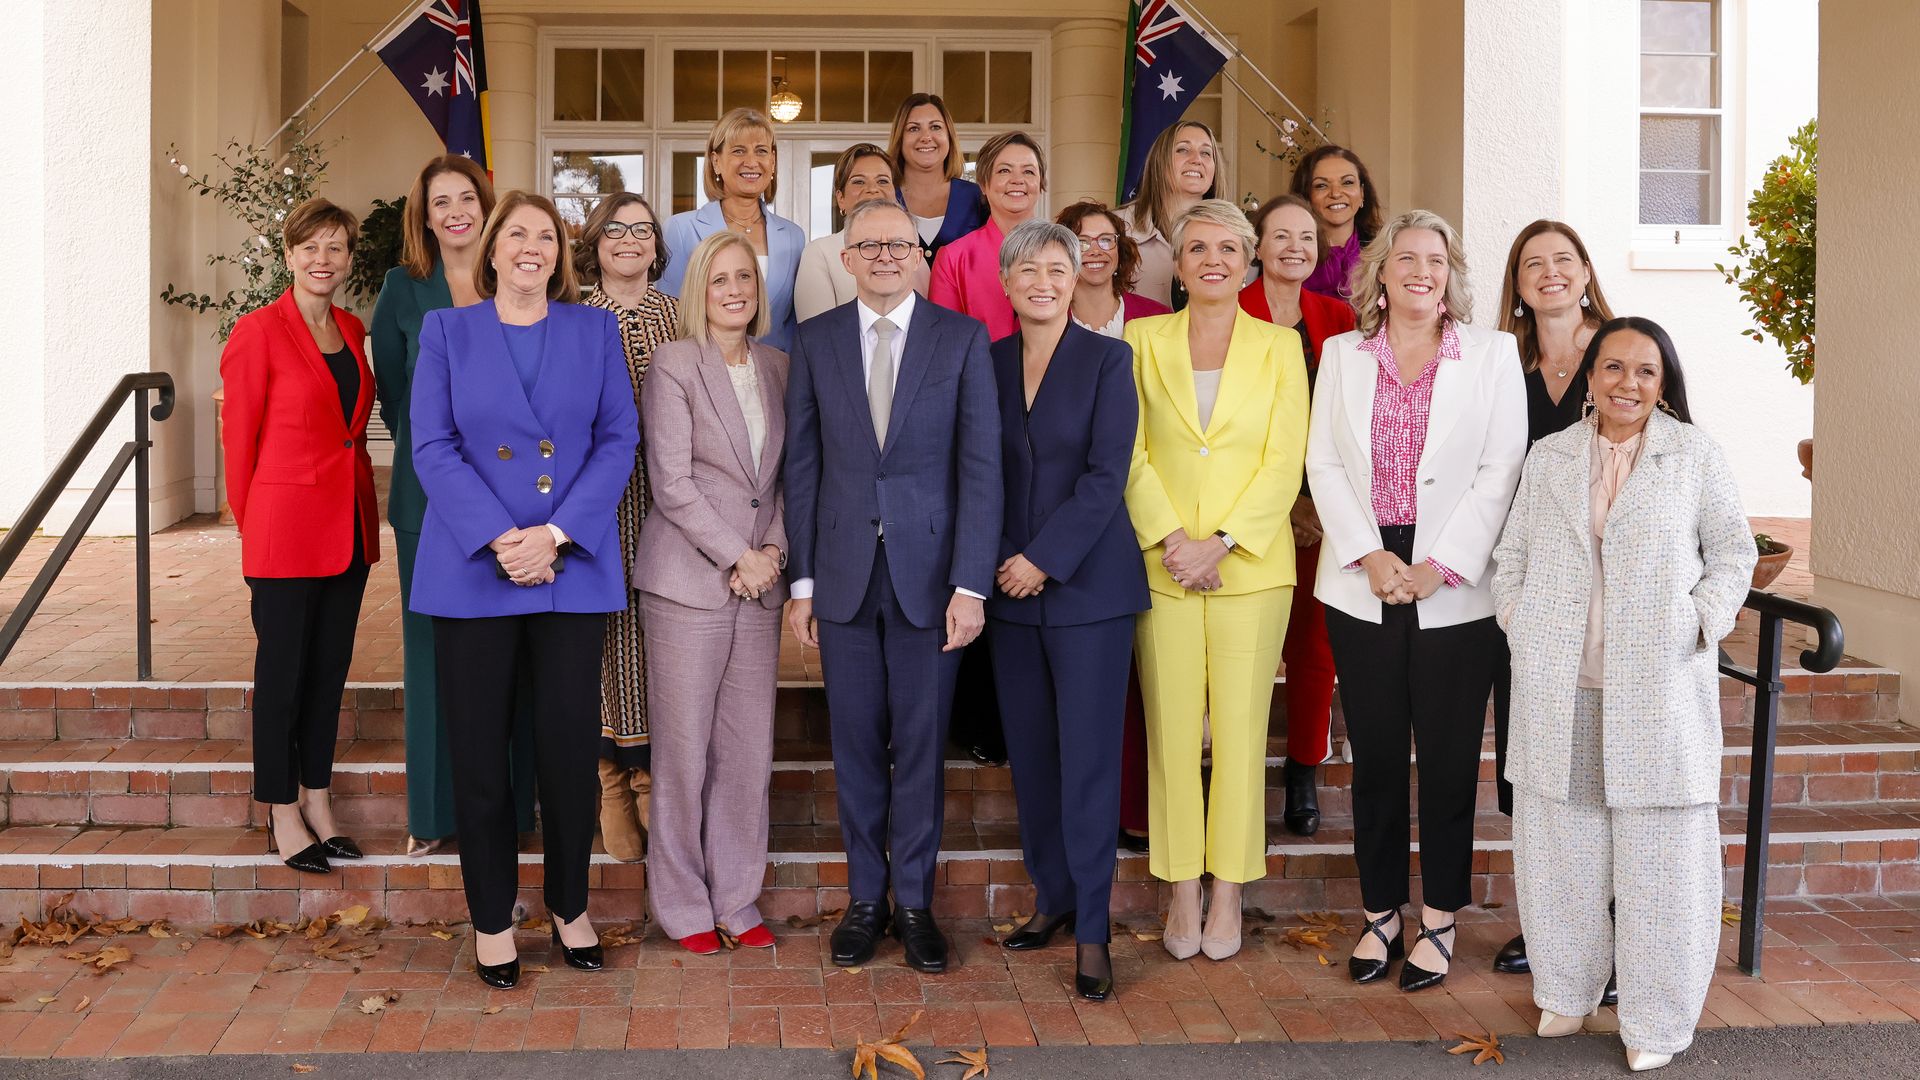 Prime Minister Anthony Albanese poses for a group photo with his female ministers after a swearing-in ceremony at Government House on June 01, 2022 in Canberra, Australia. 